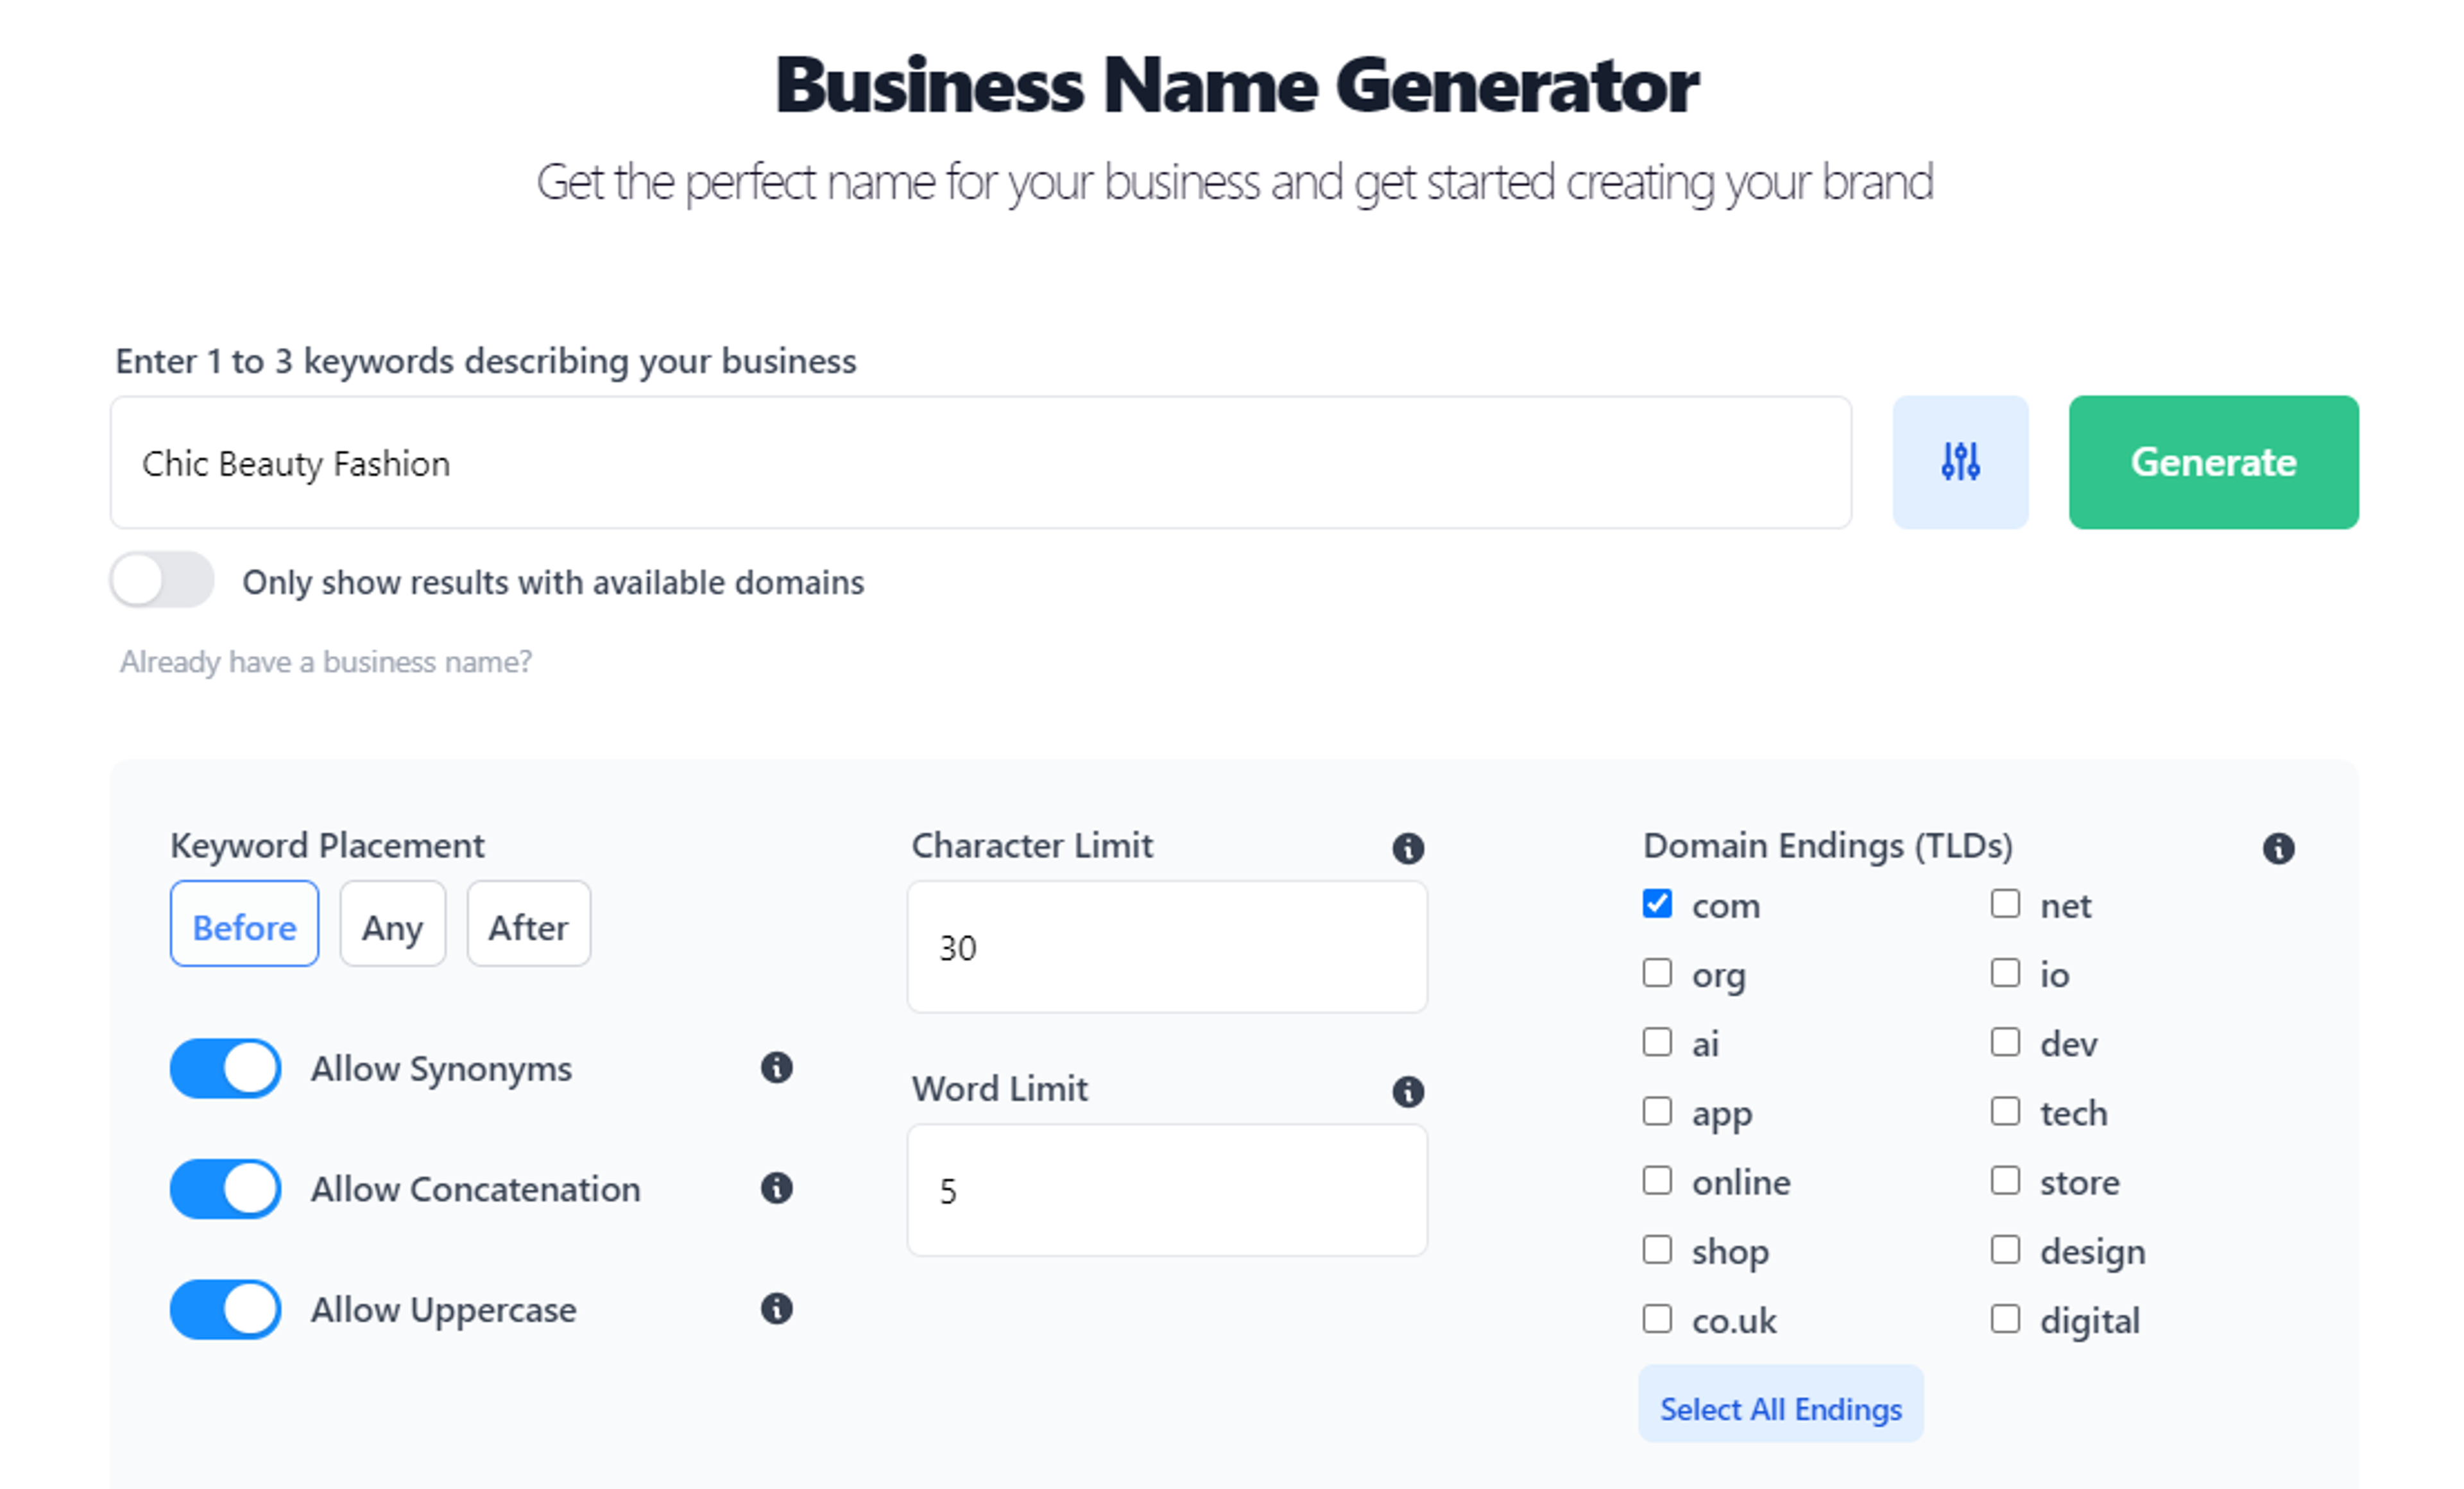 Our handy business name generator